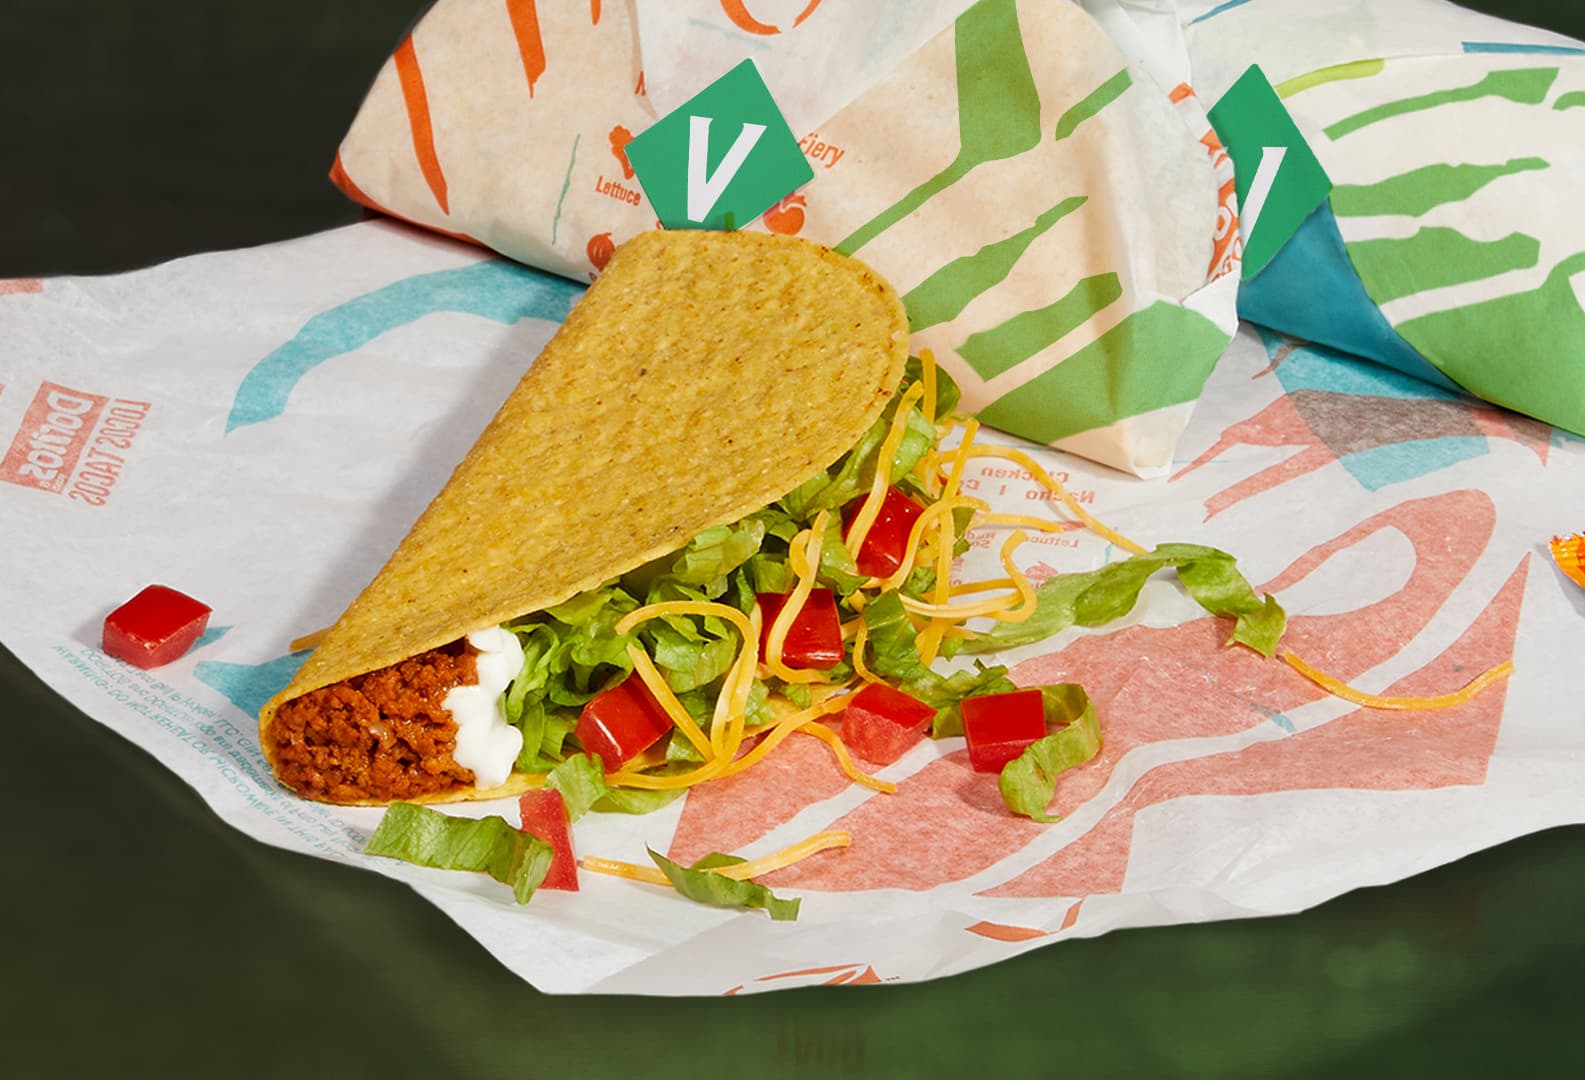 Taco Bell tests its own meat alternative before testing Beyond Meat